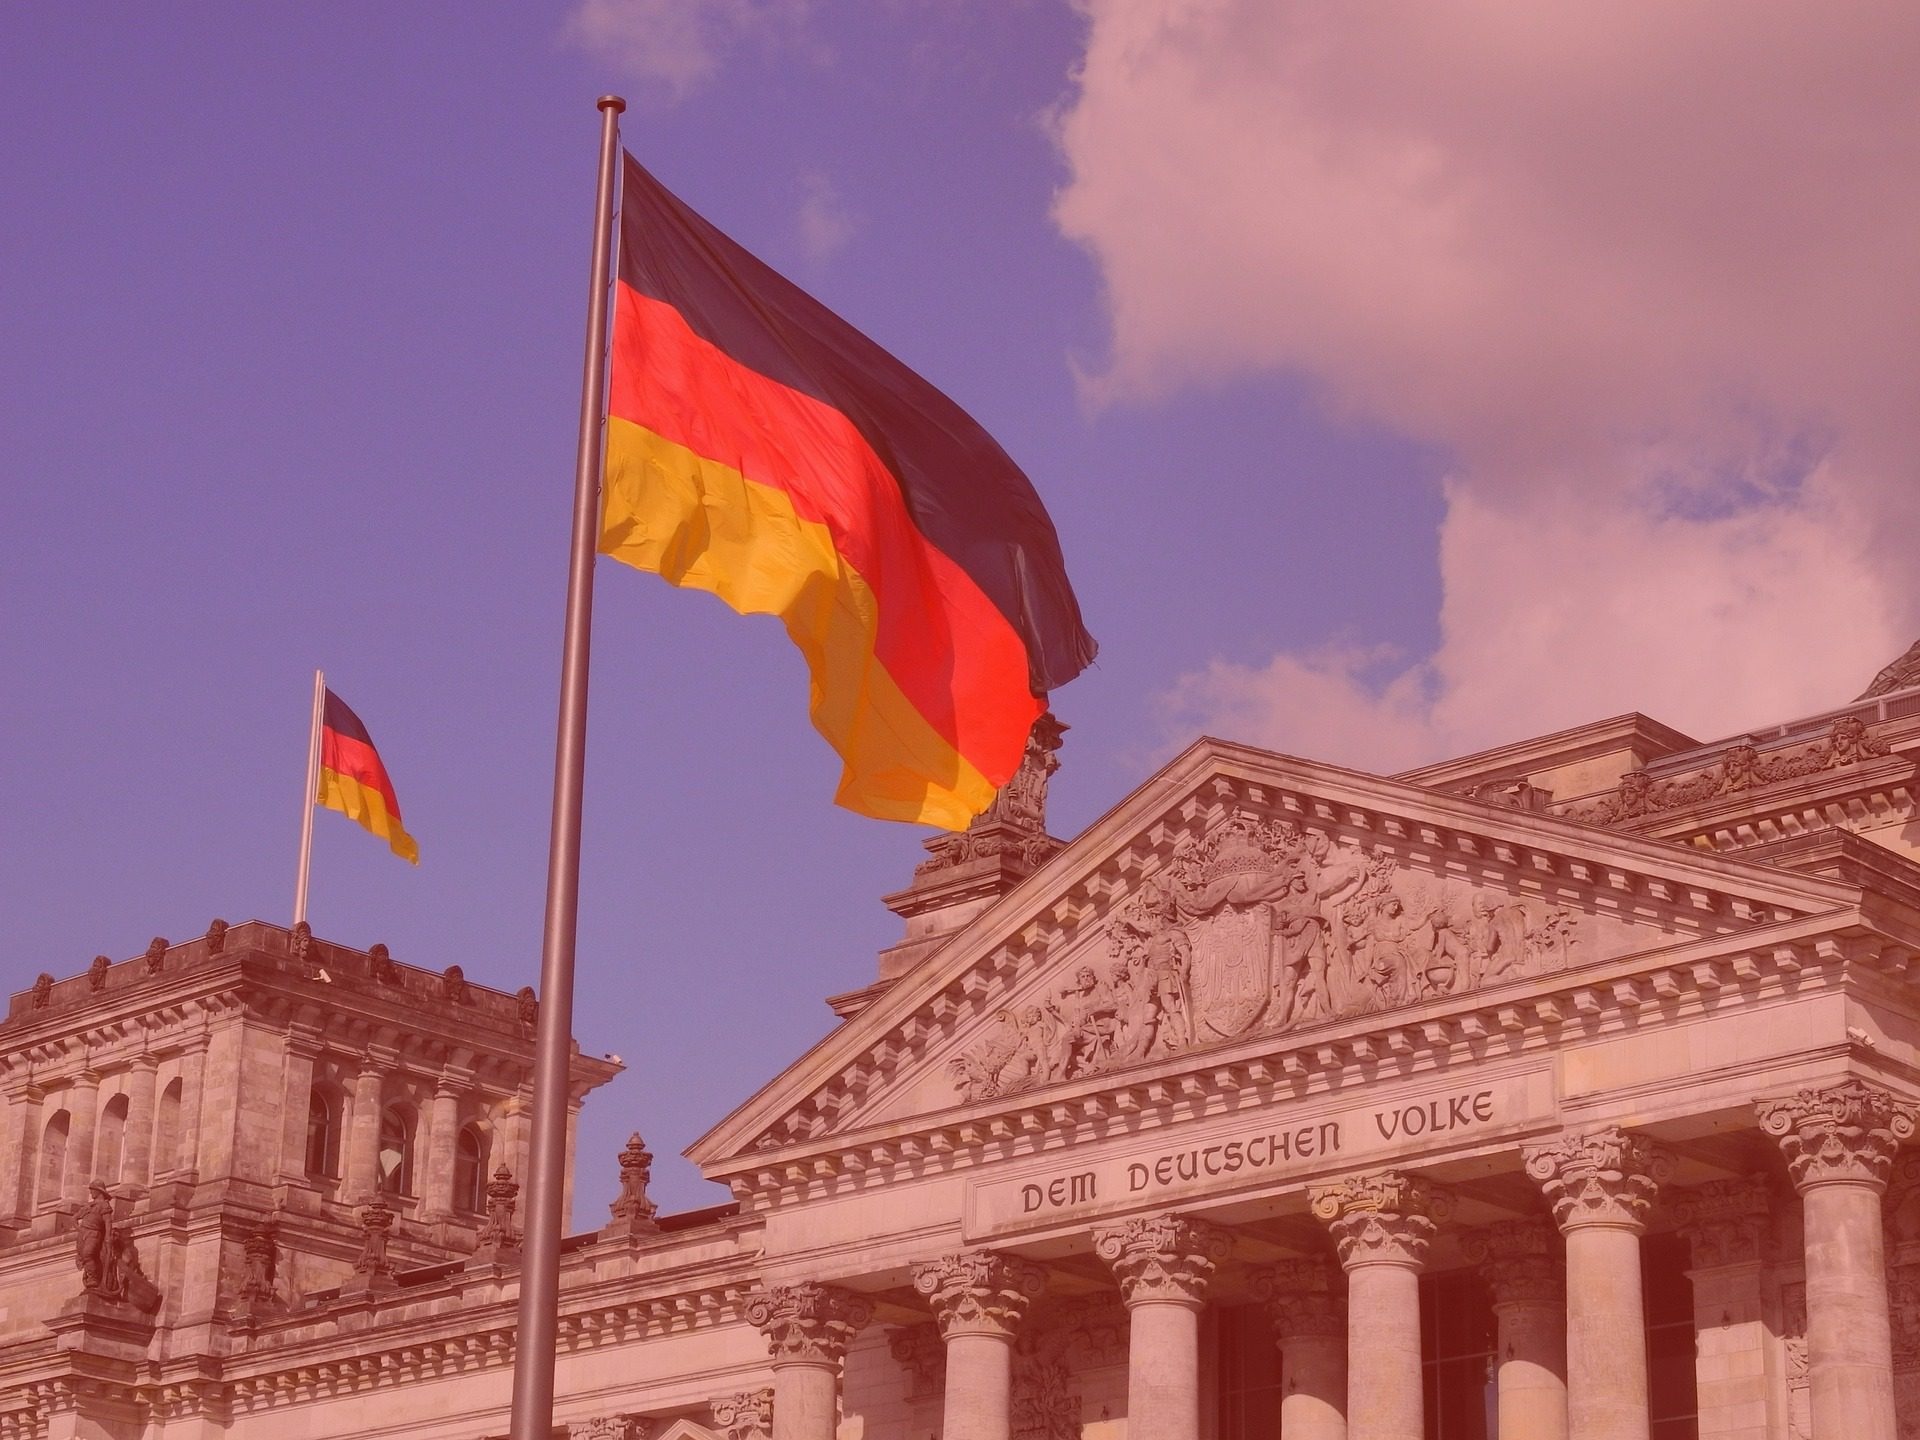 Amelie Nickel and Eva Groß – Assessing Regional Variation in Support for the Radical Right-Wing Party ‘Alternative for Germany’ (AfD)—A Novel Application of Institutional Anomie Theory across German Districts